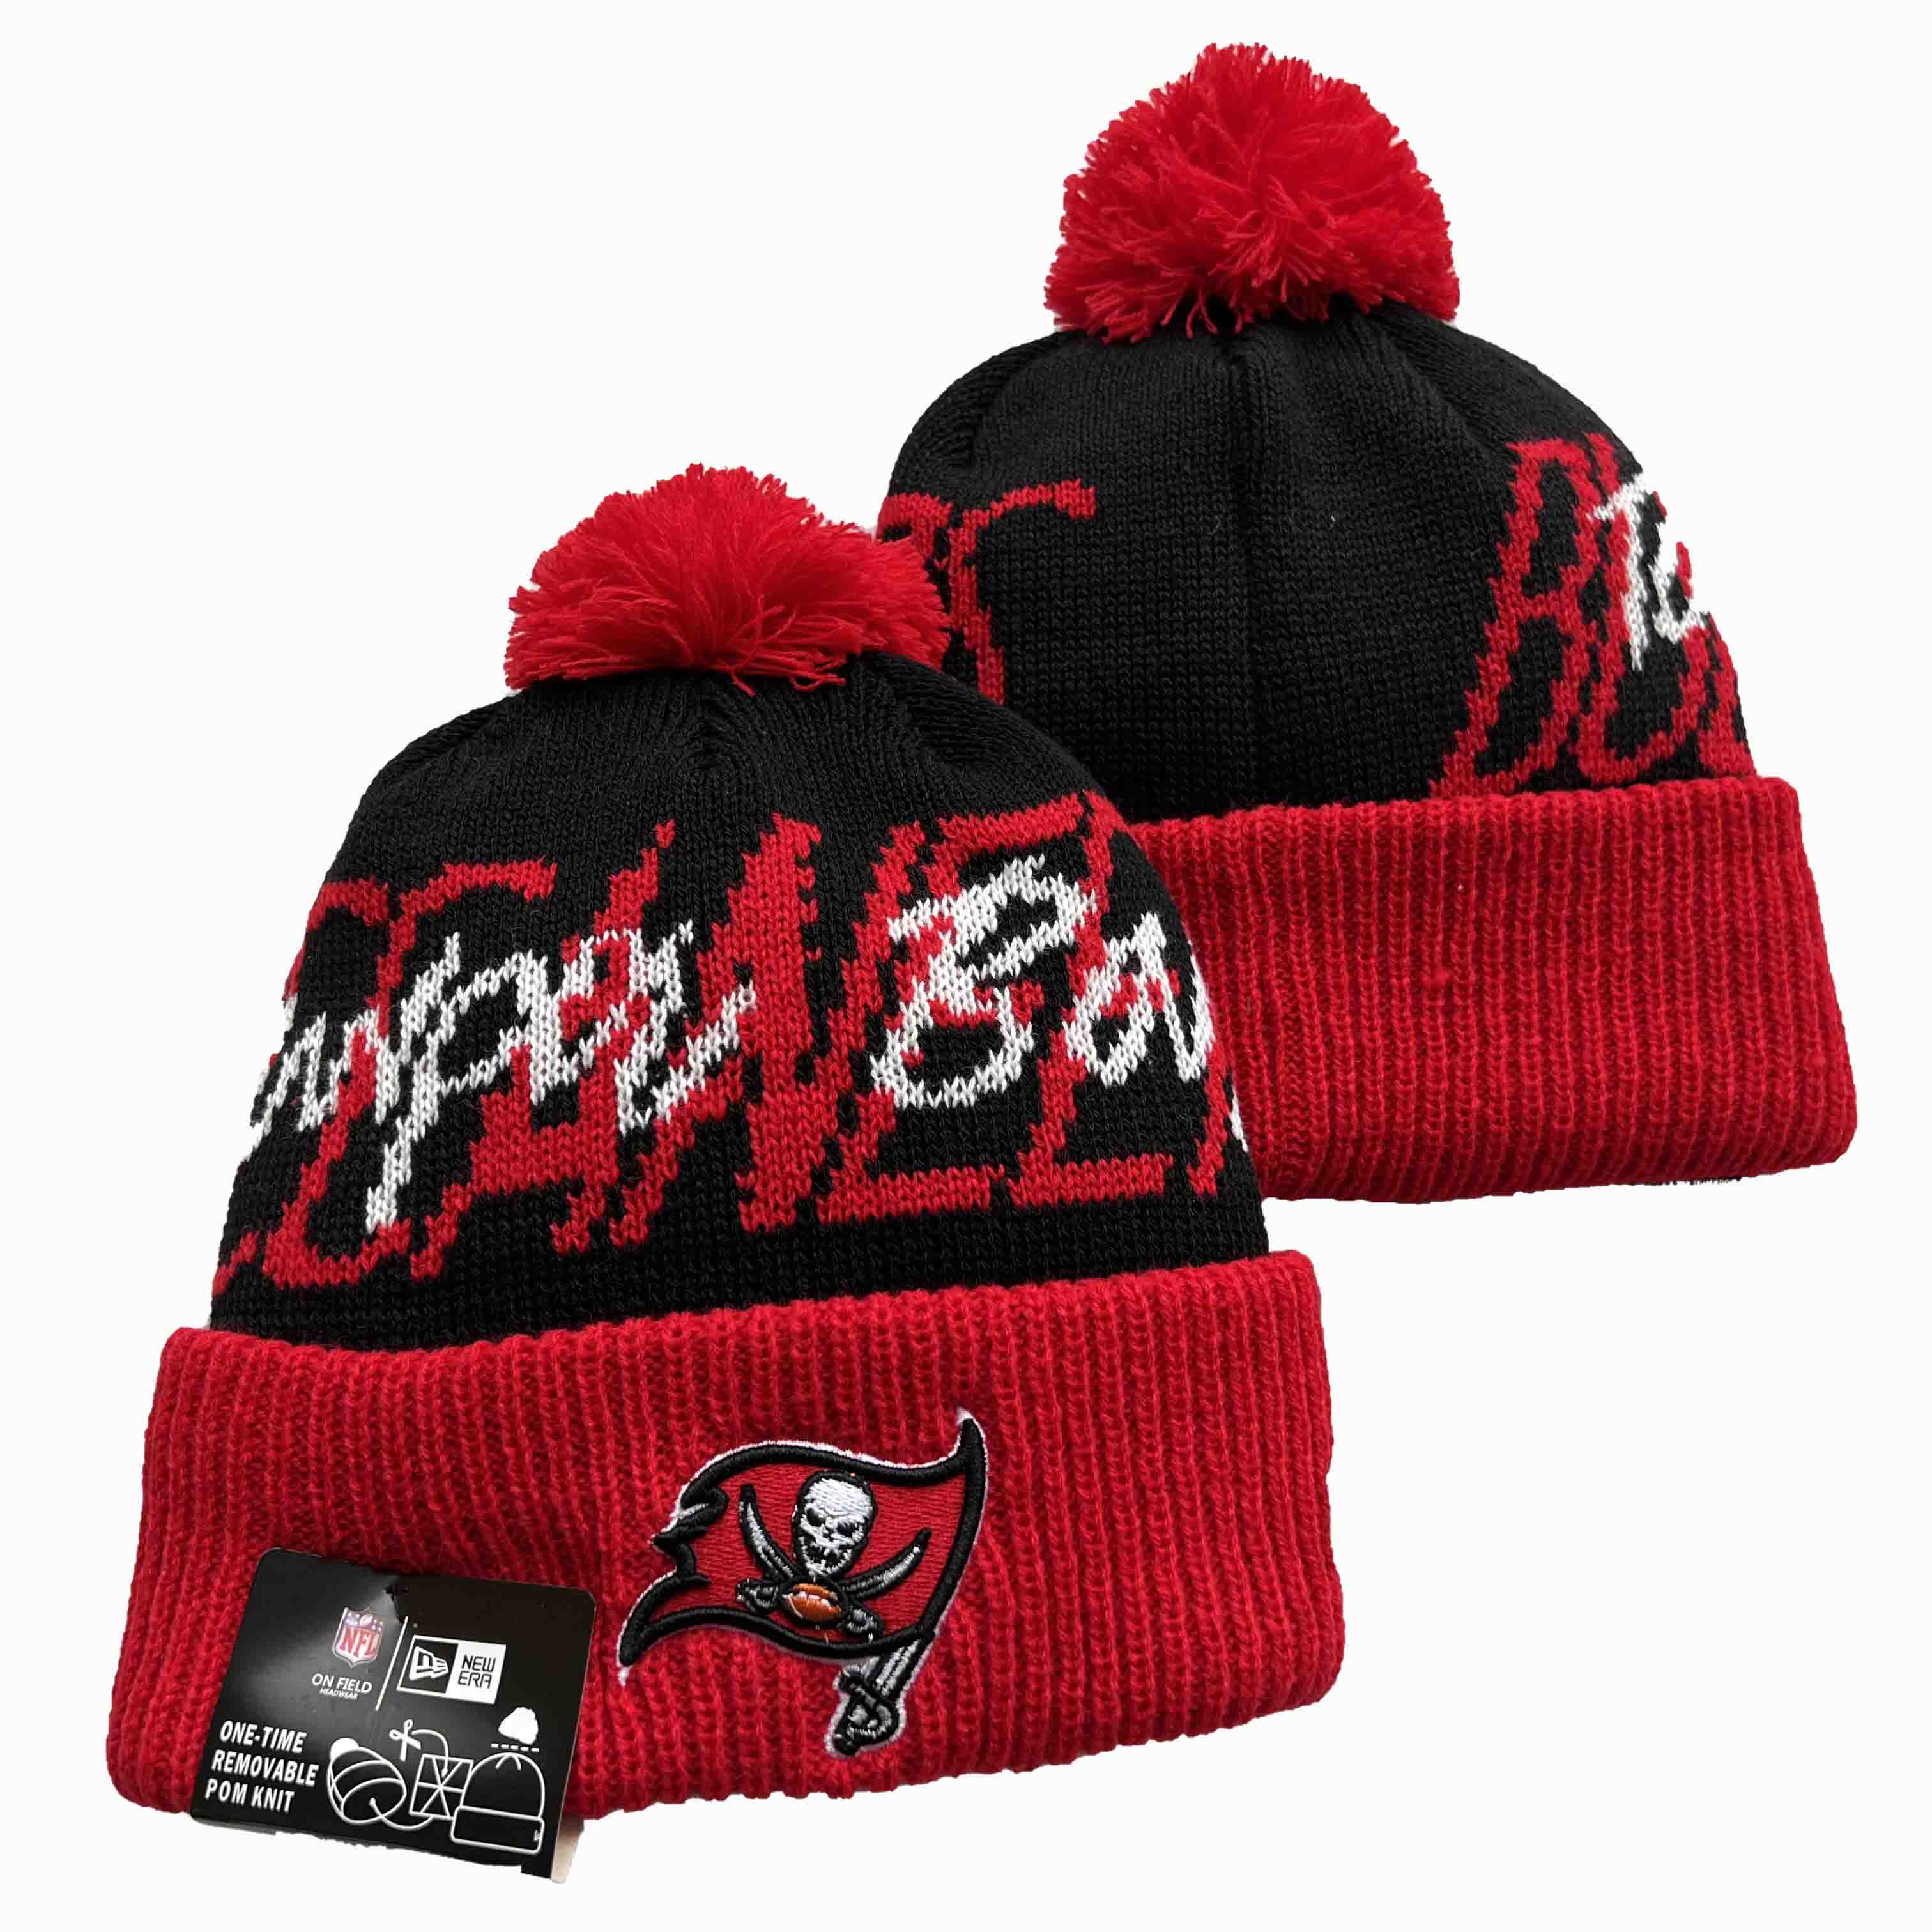 Tampa Bay Buccaneers Knit Hats 083